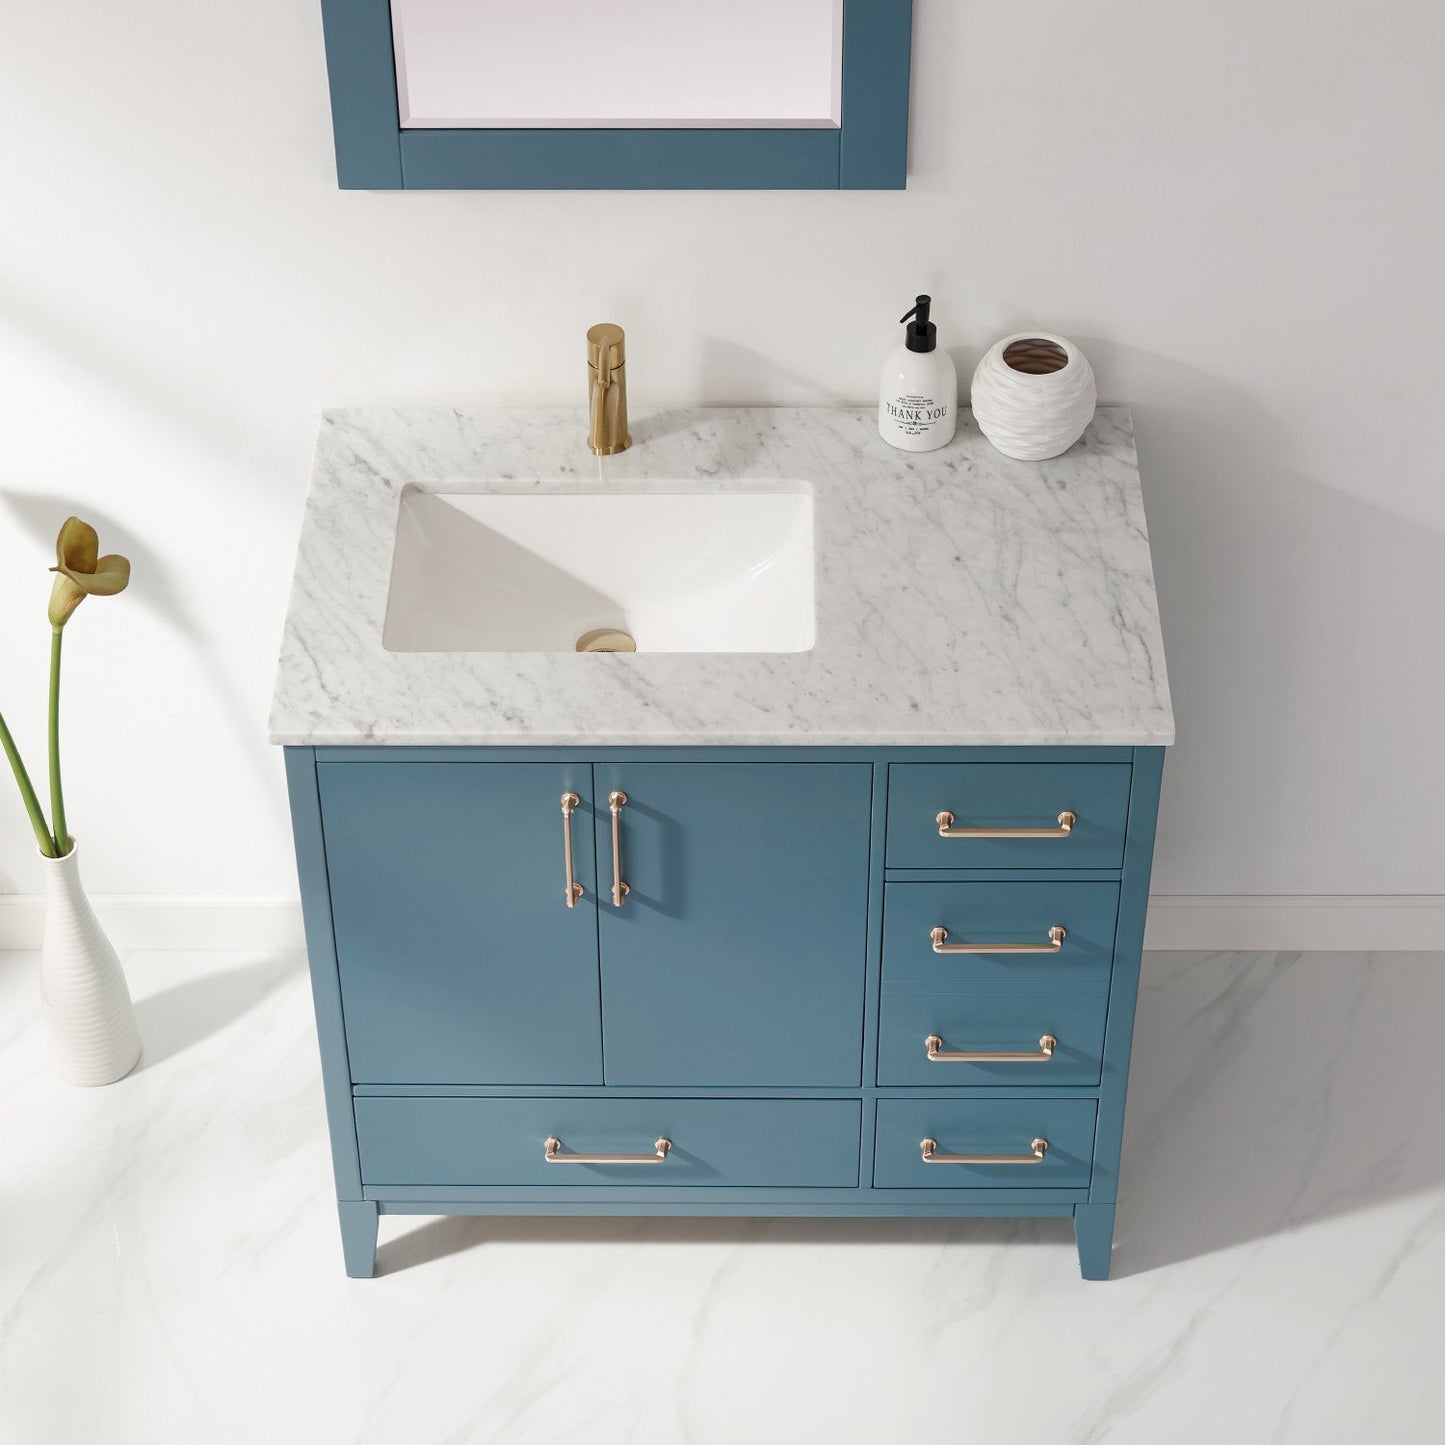 Sutton 36" Single Bathroom Vanity Set in Royal Green and Carrara White Marble Countertop with Mirror